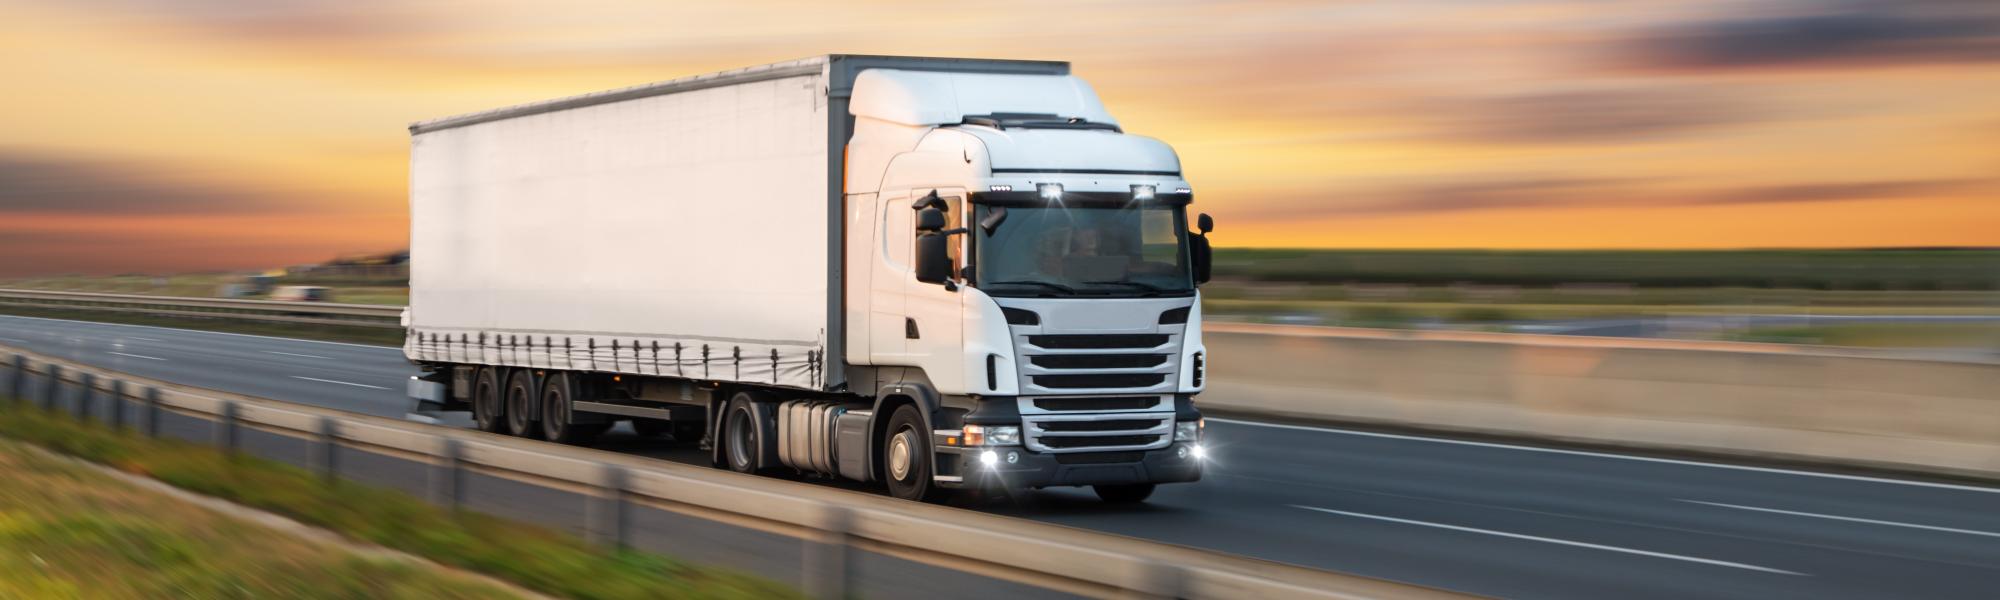 Smart tachograph version 2: EU Member States support timely introduction 